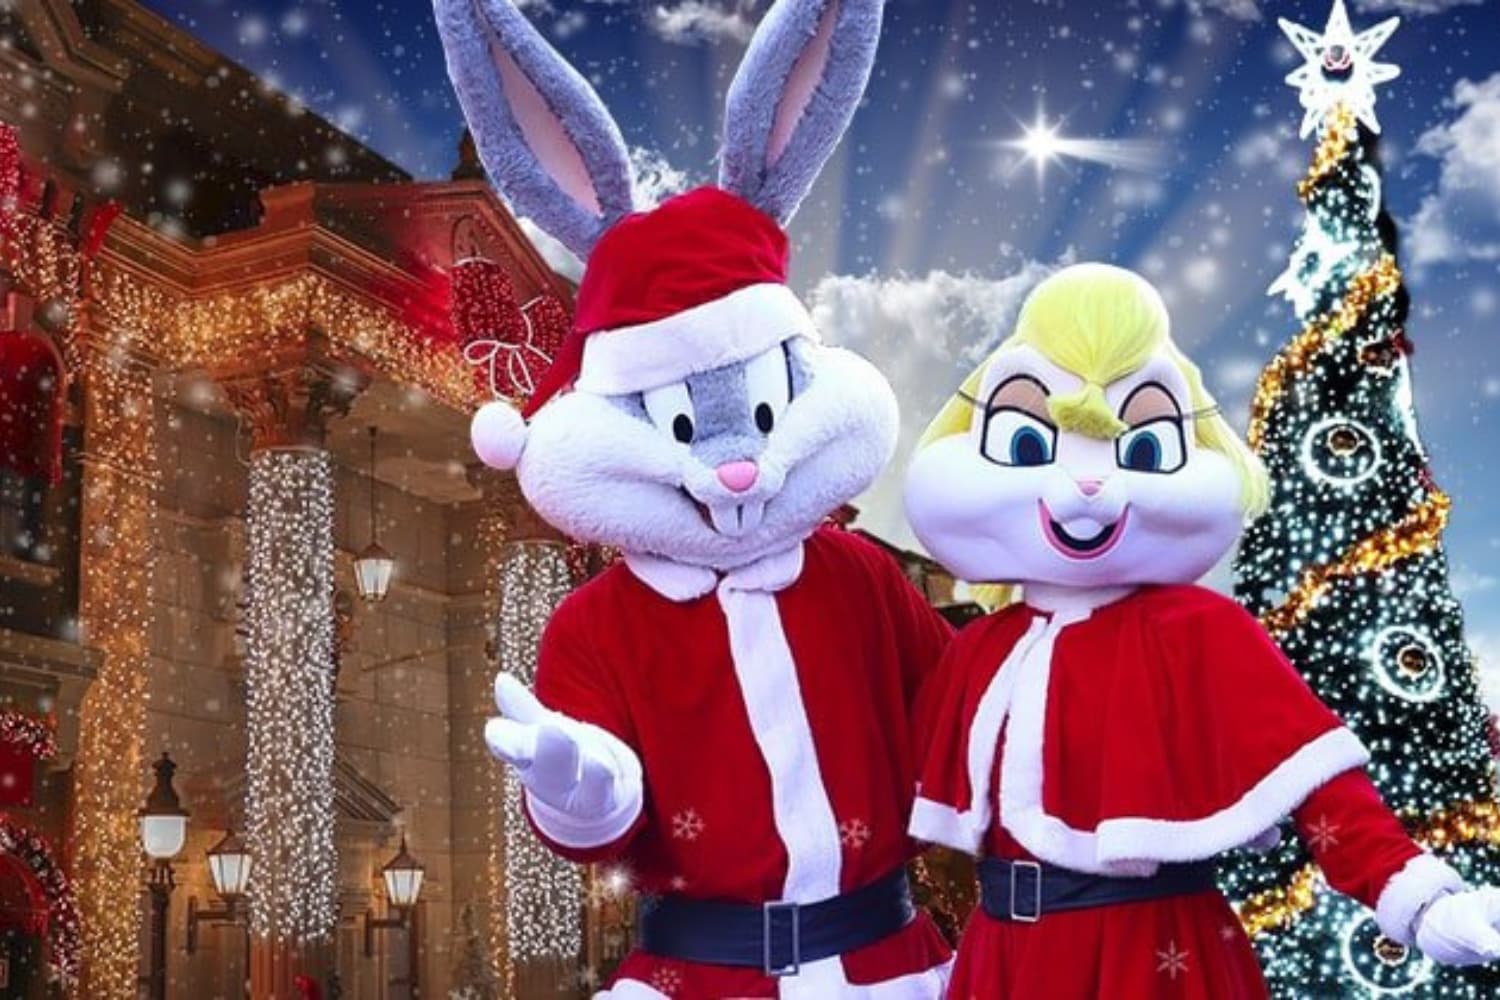 Christmas shows in Madrid's amusement parks